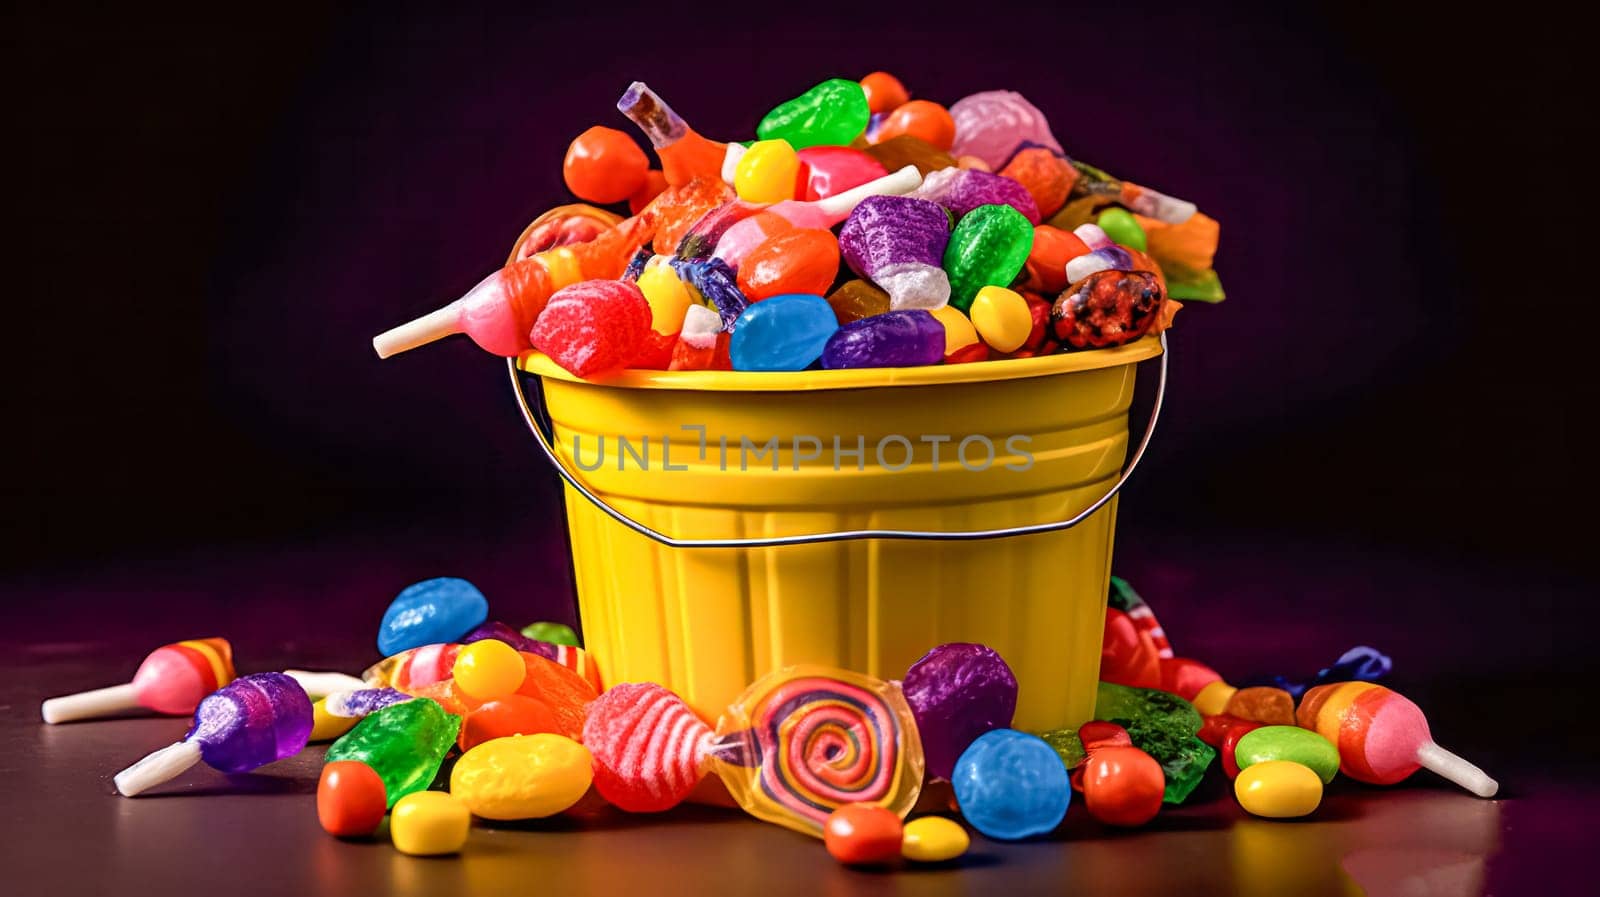 A yellow bucket filled with a variety of colorful candies. The candies are scattered all over the bucket, creating a fun and playful atmosphere